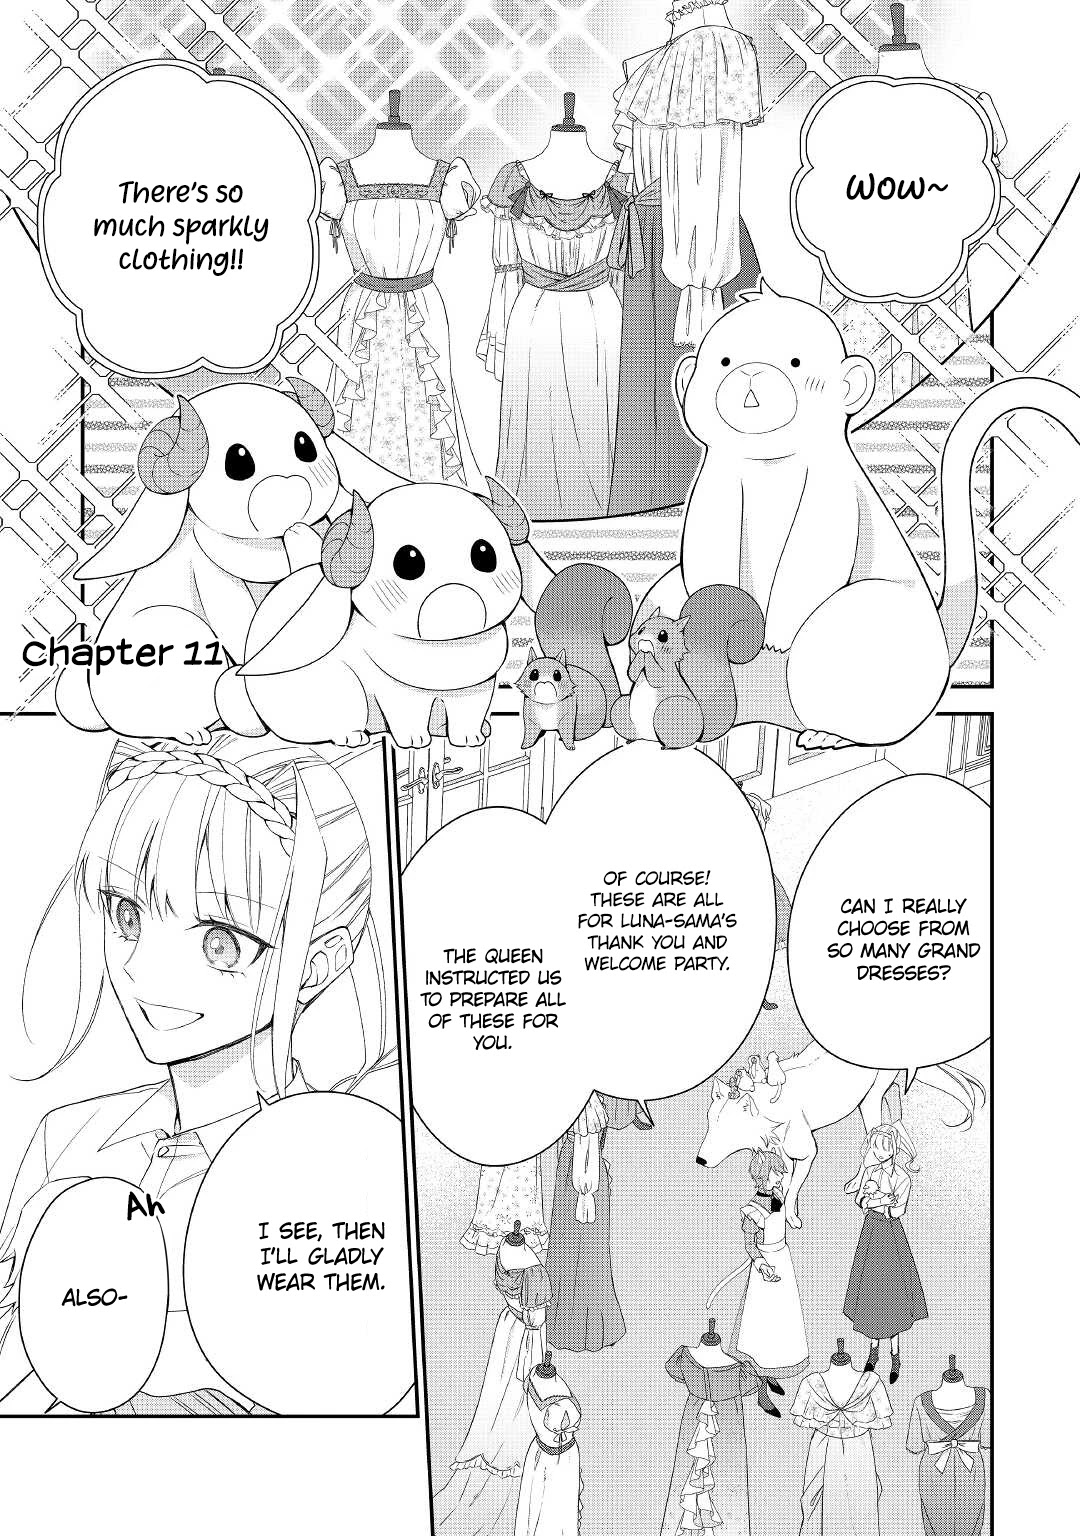 The Daughter Is A Former Veterinarian Has Been Abandoned, But Is Very Popular With Mofumofu! - Page 2